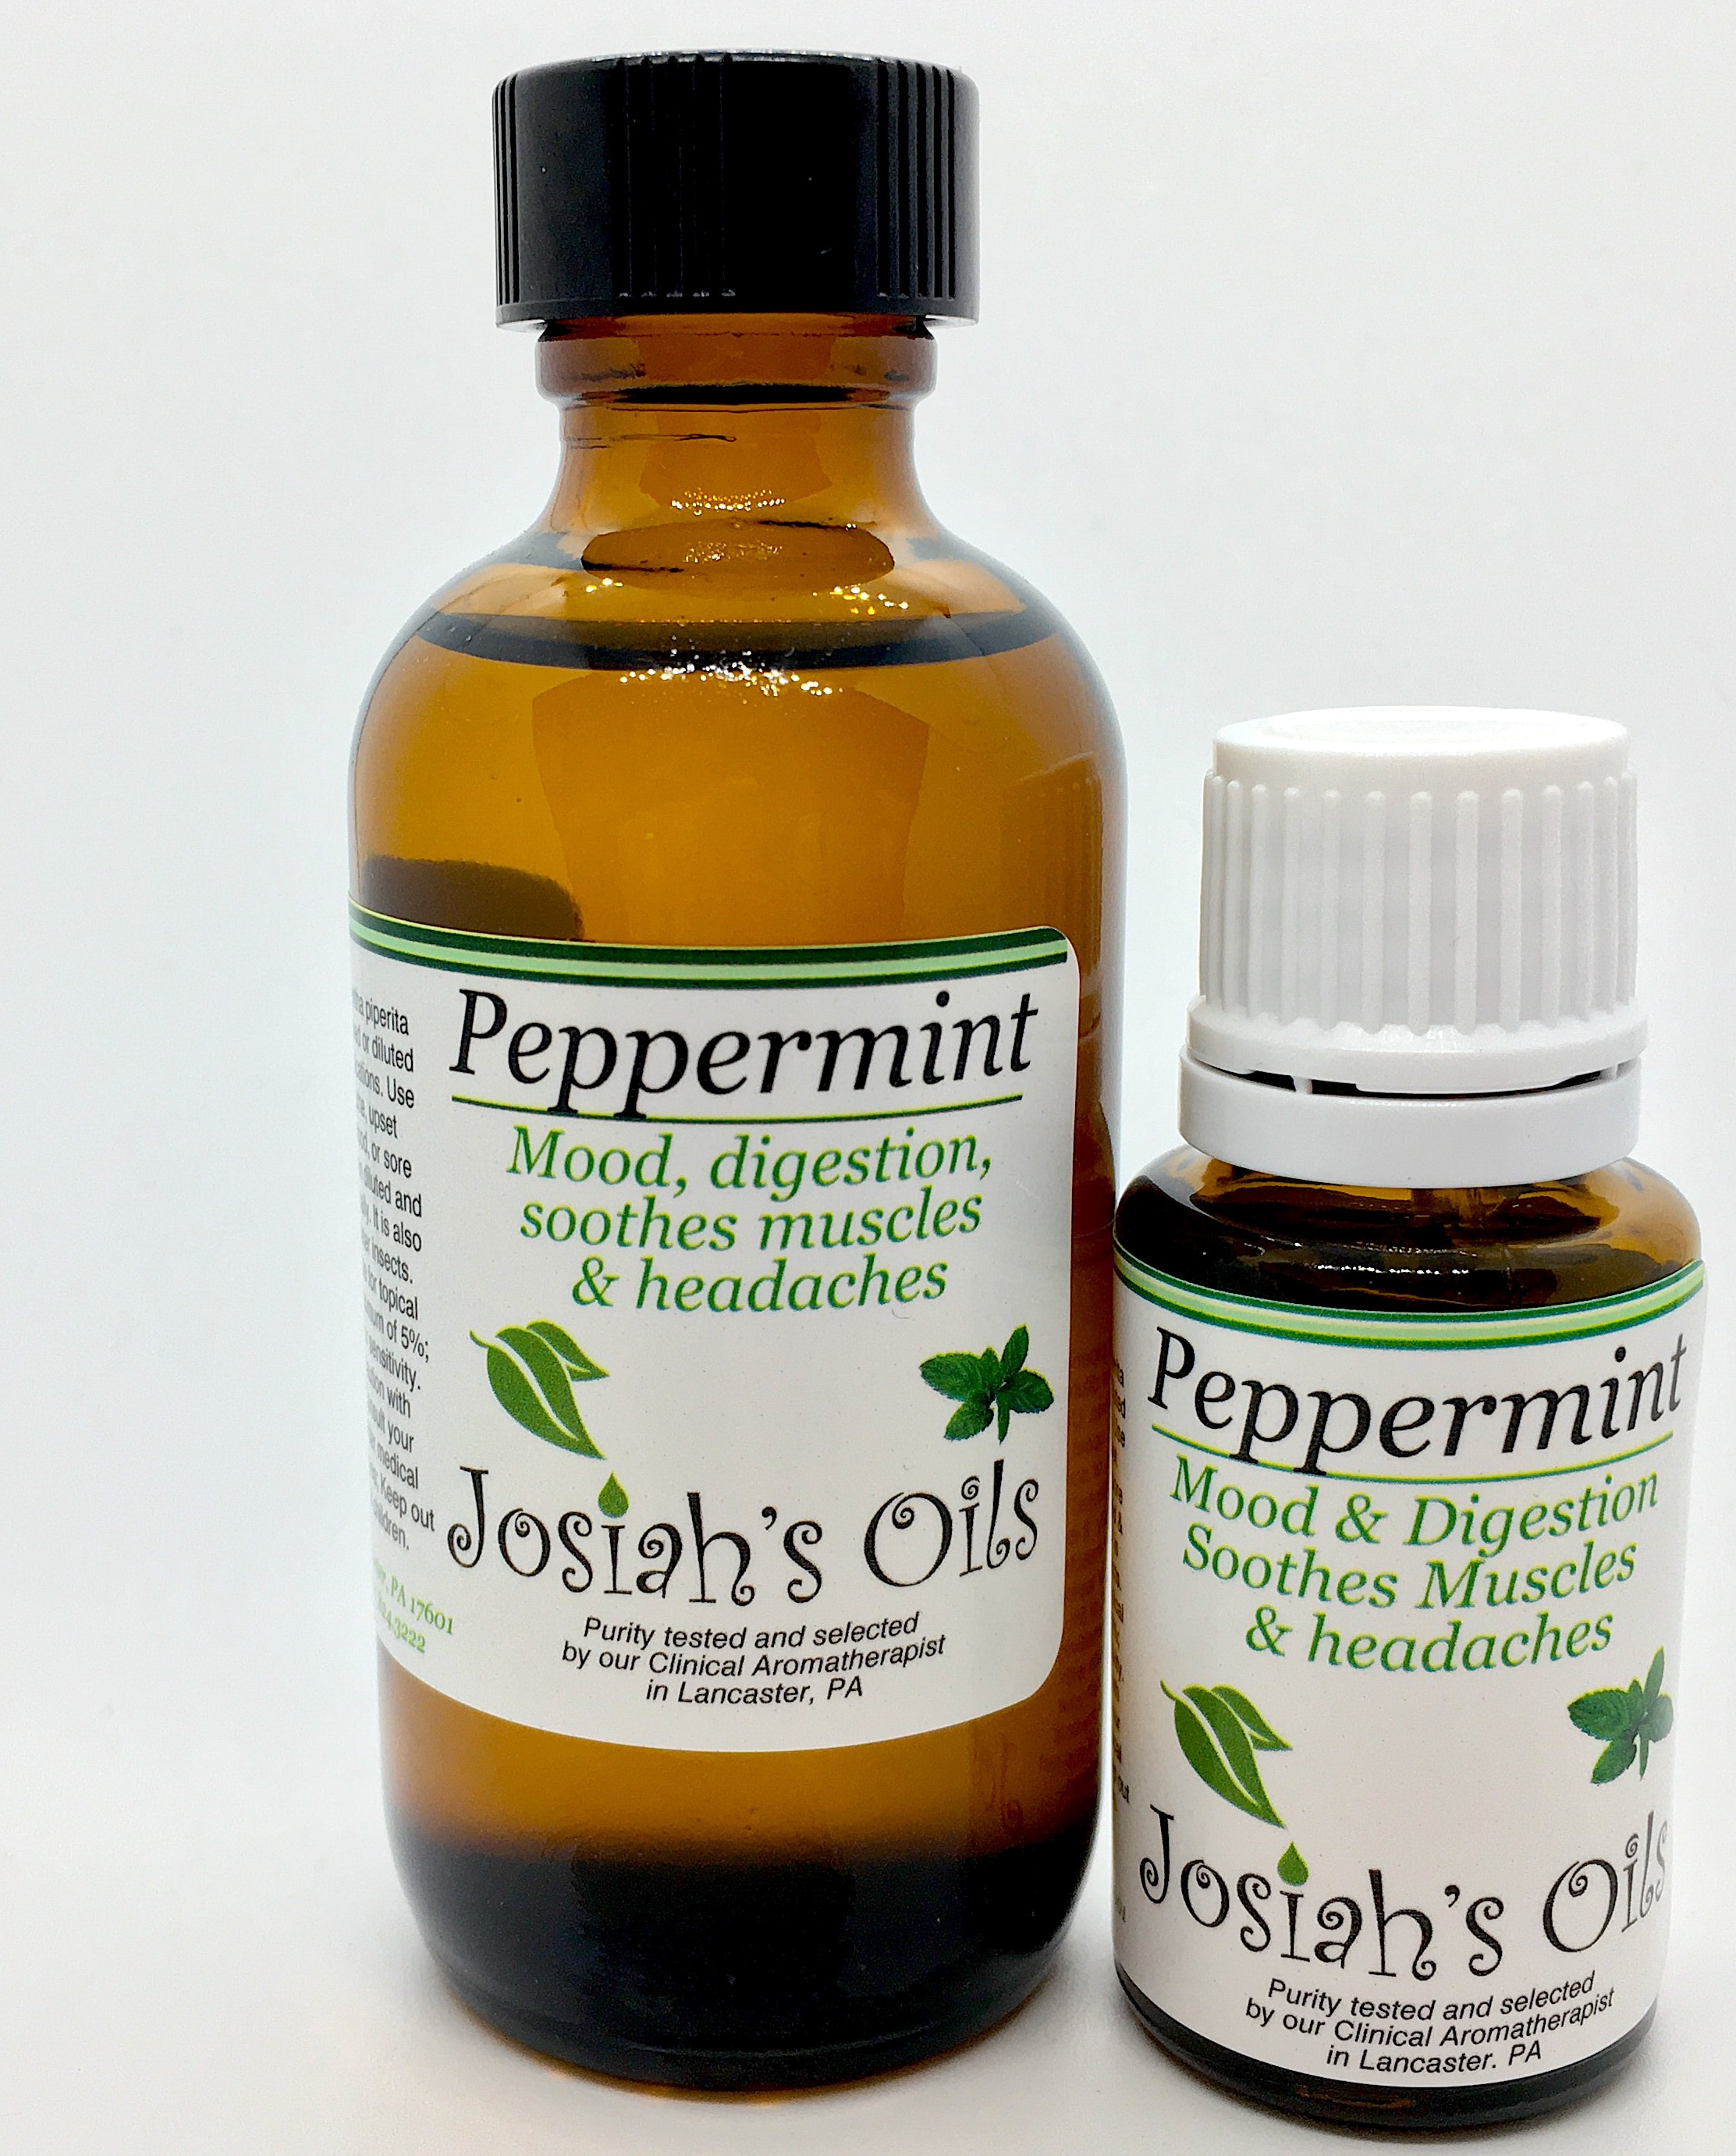 peppermint oil extract